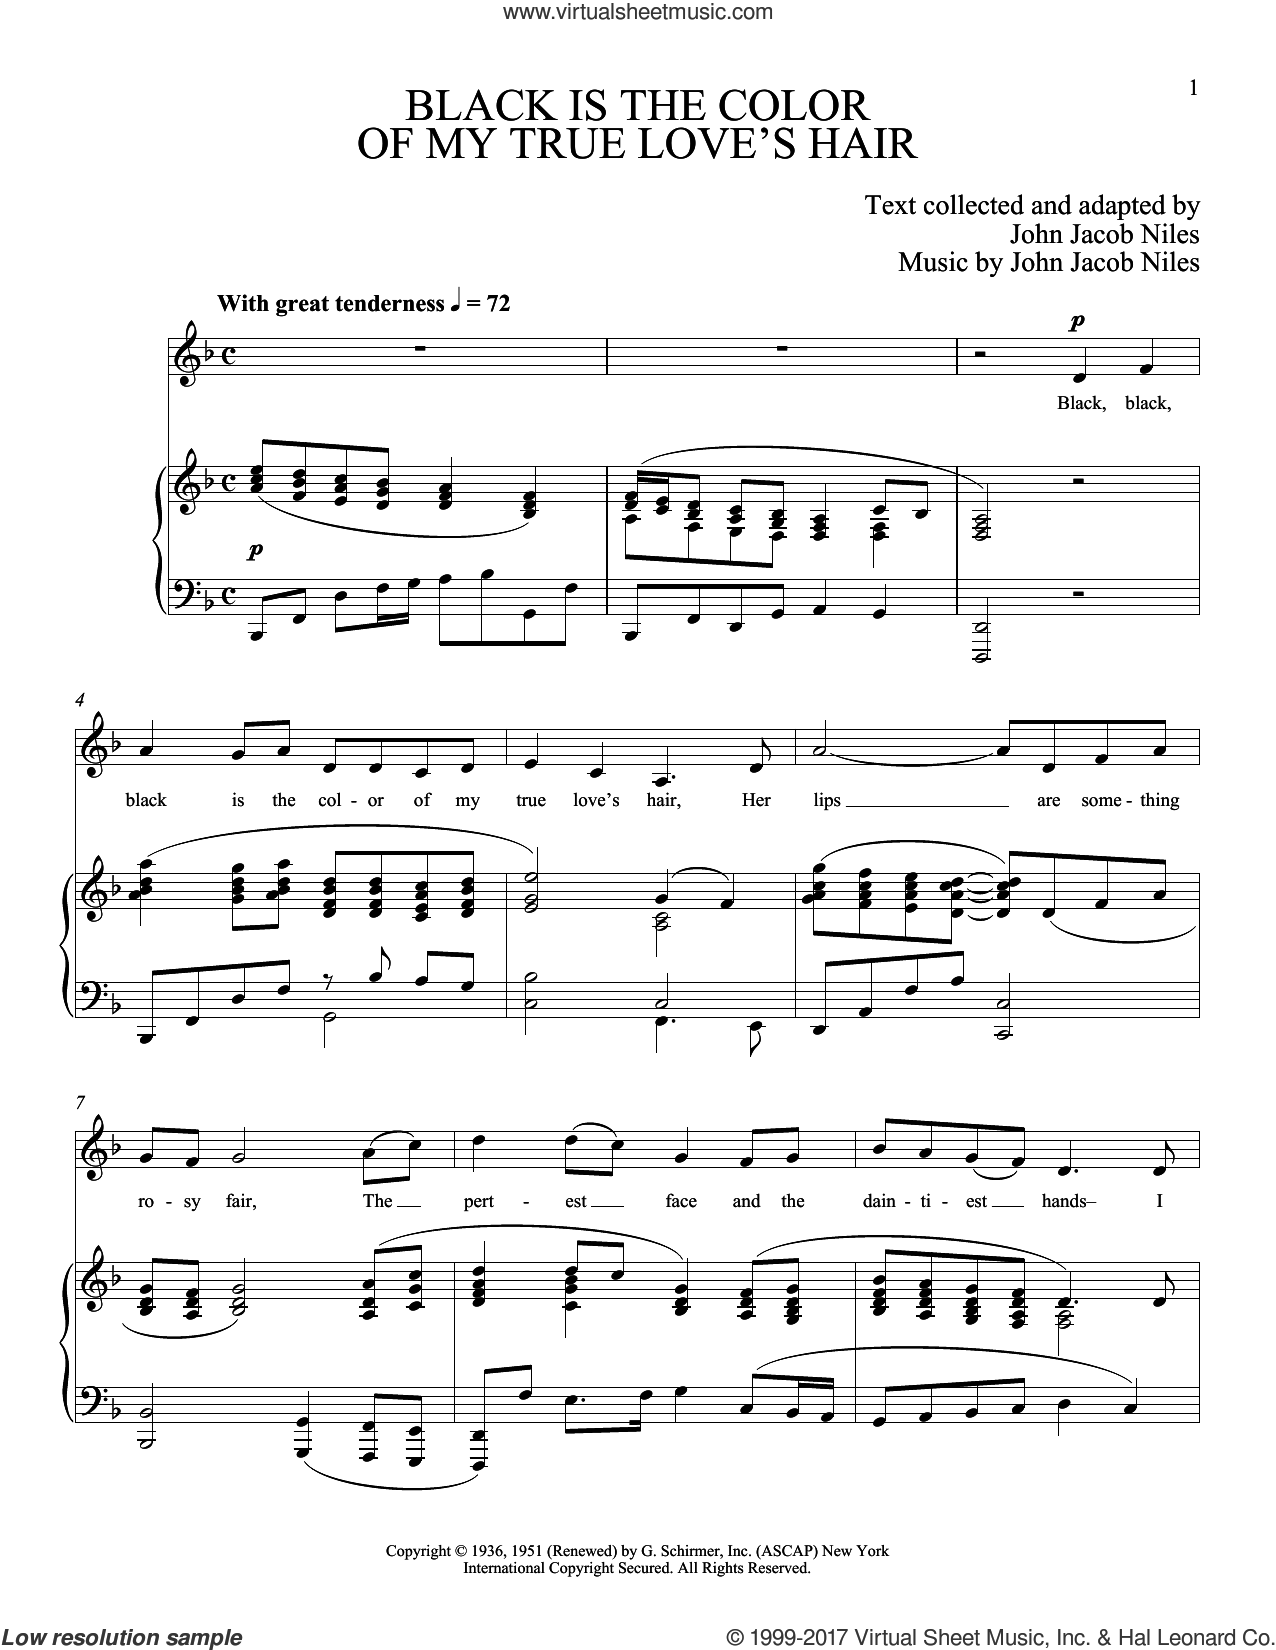 Boytim - Black Is The Color Of My True Love's Hair sheet music for